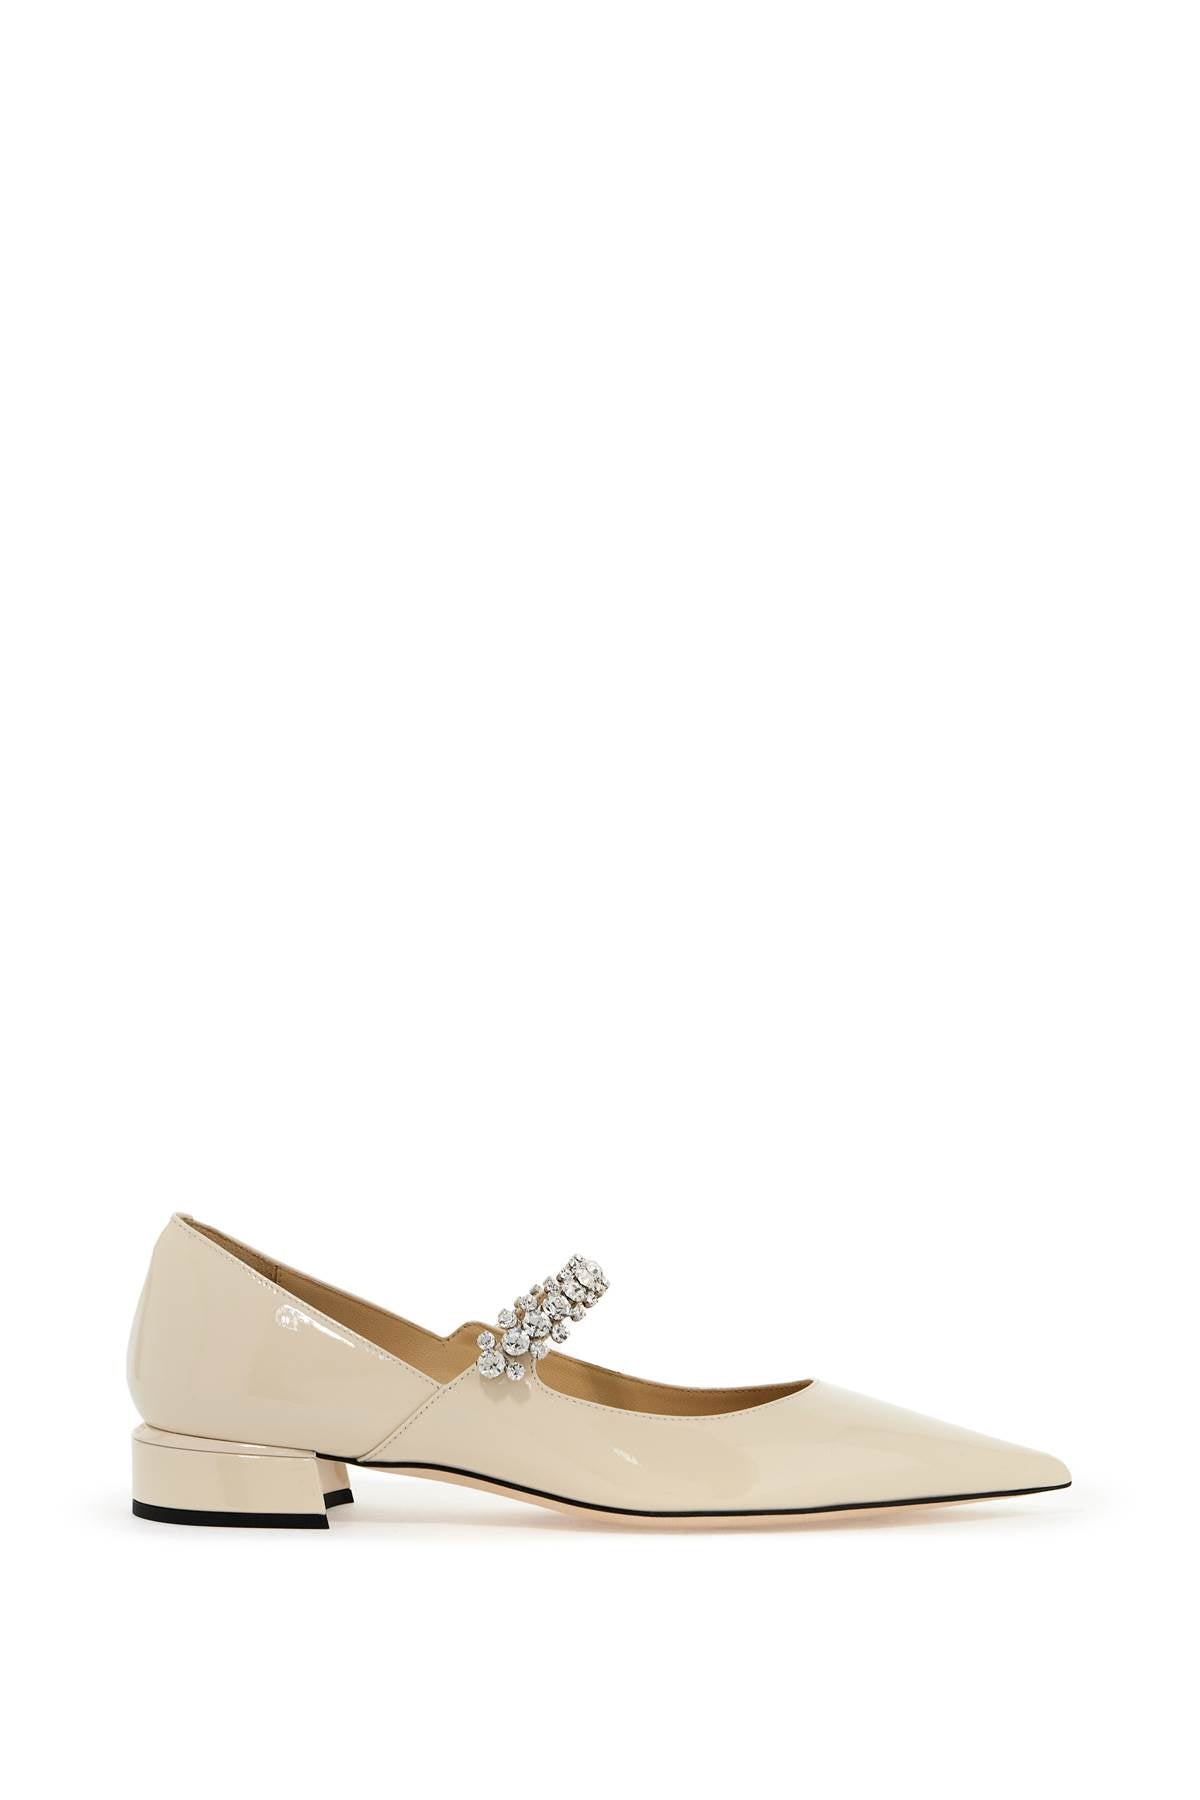 JIMMY CHOO Embellished Patent Leather Pumps - Neutral